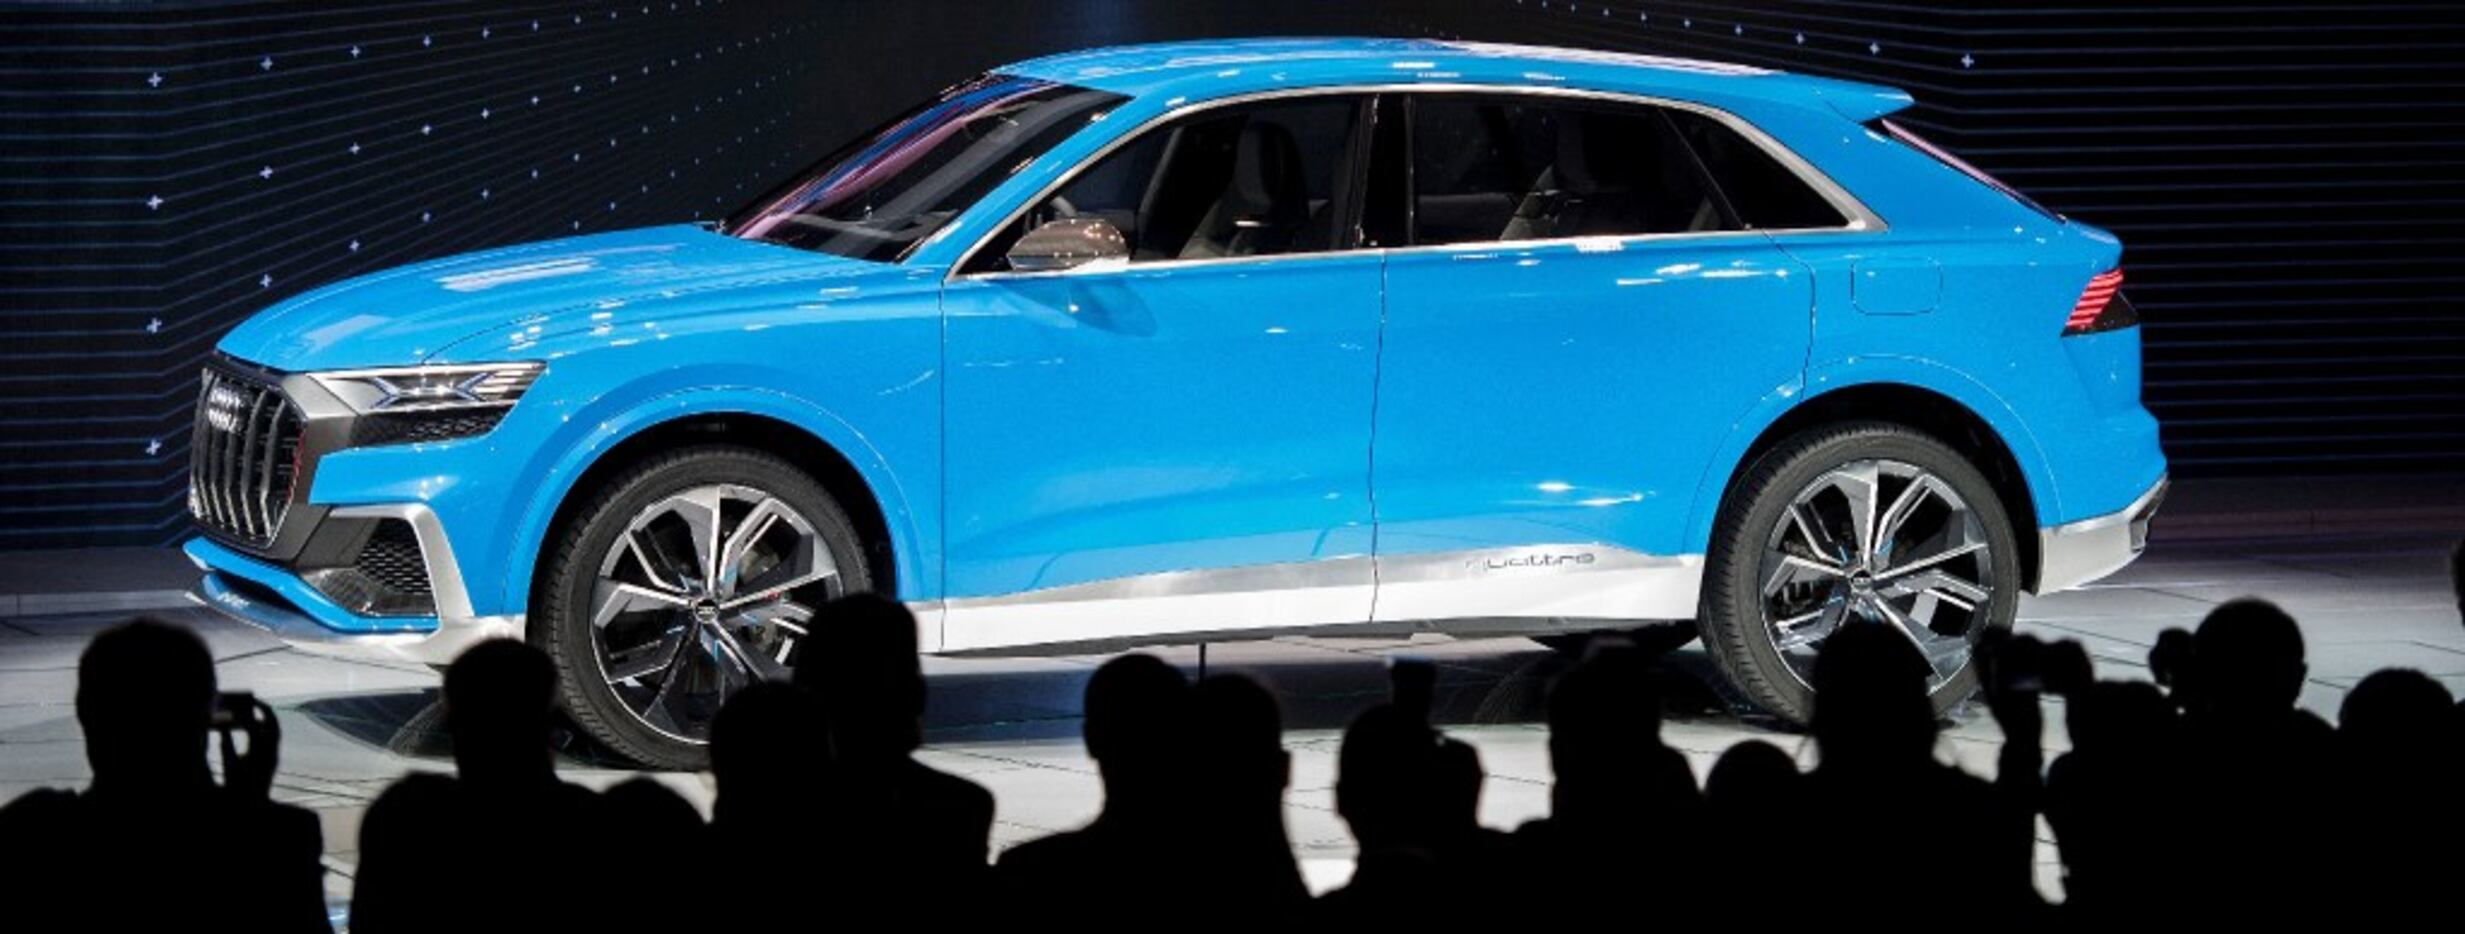 The Audi Q8 concept SUV is unveiled during the 2017 North American International Auto Show...